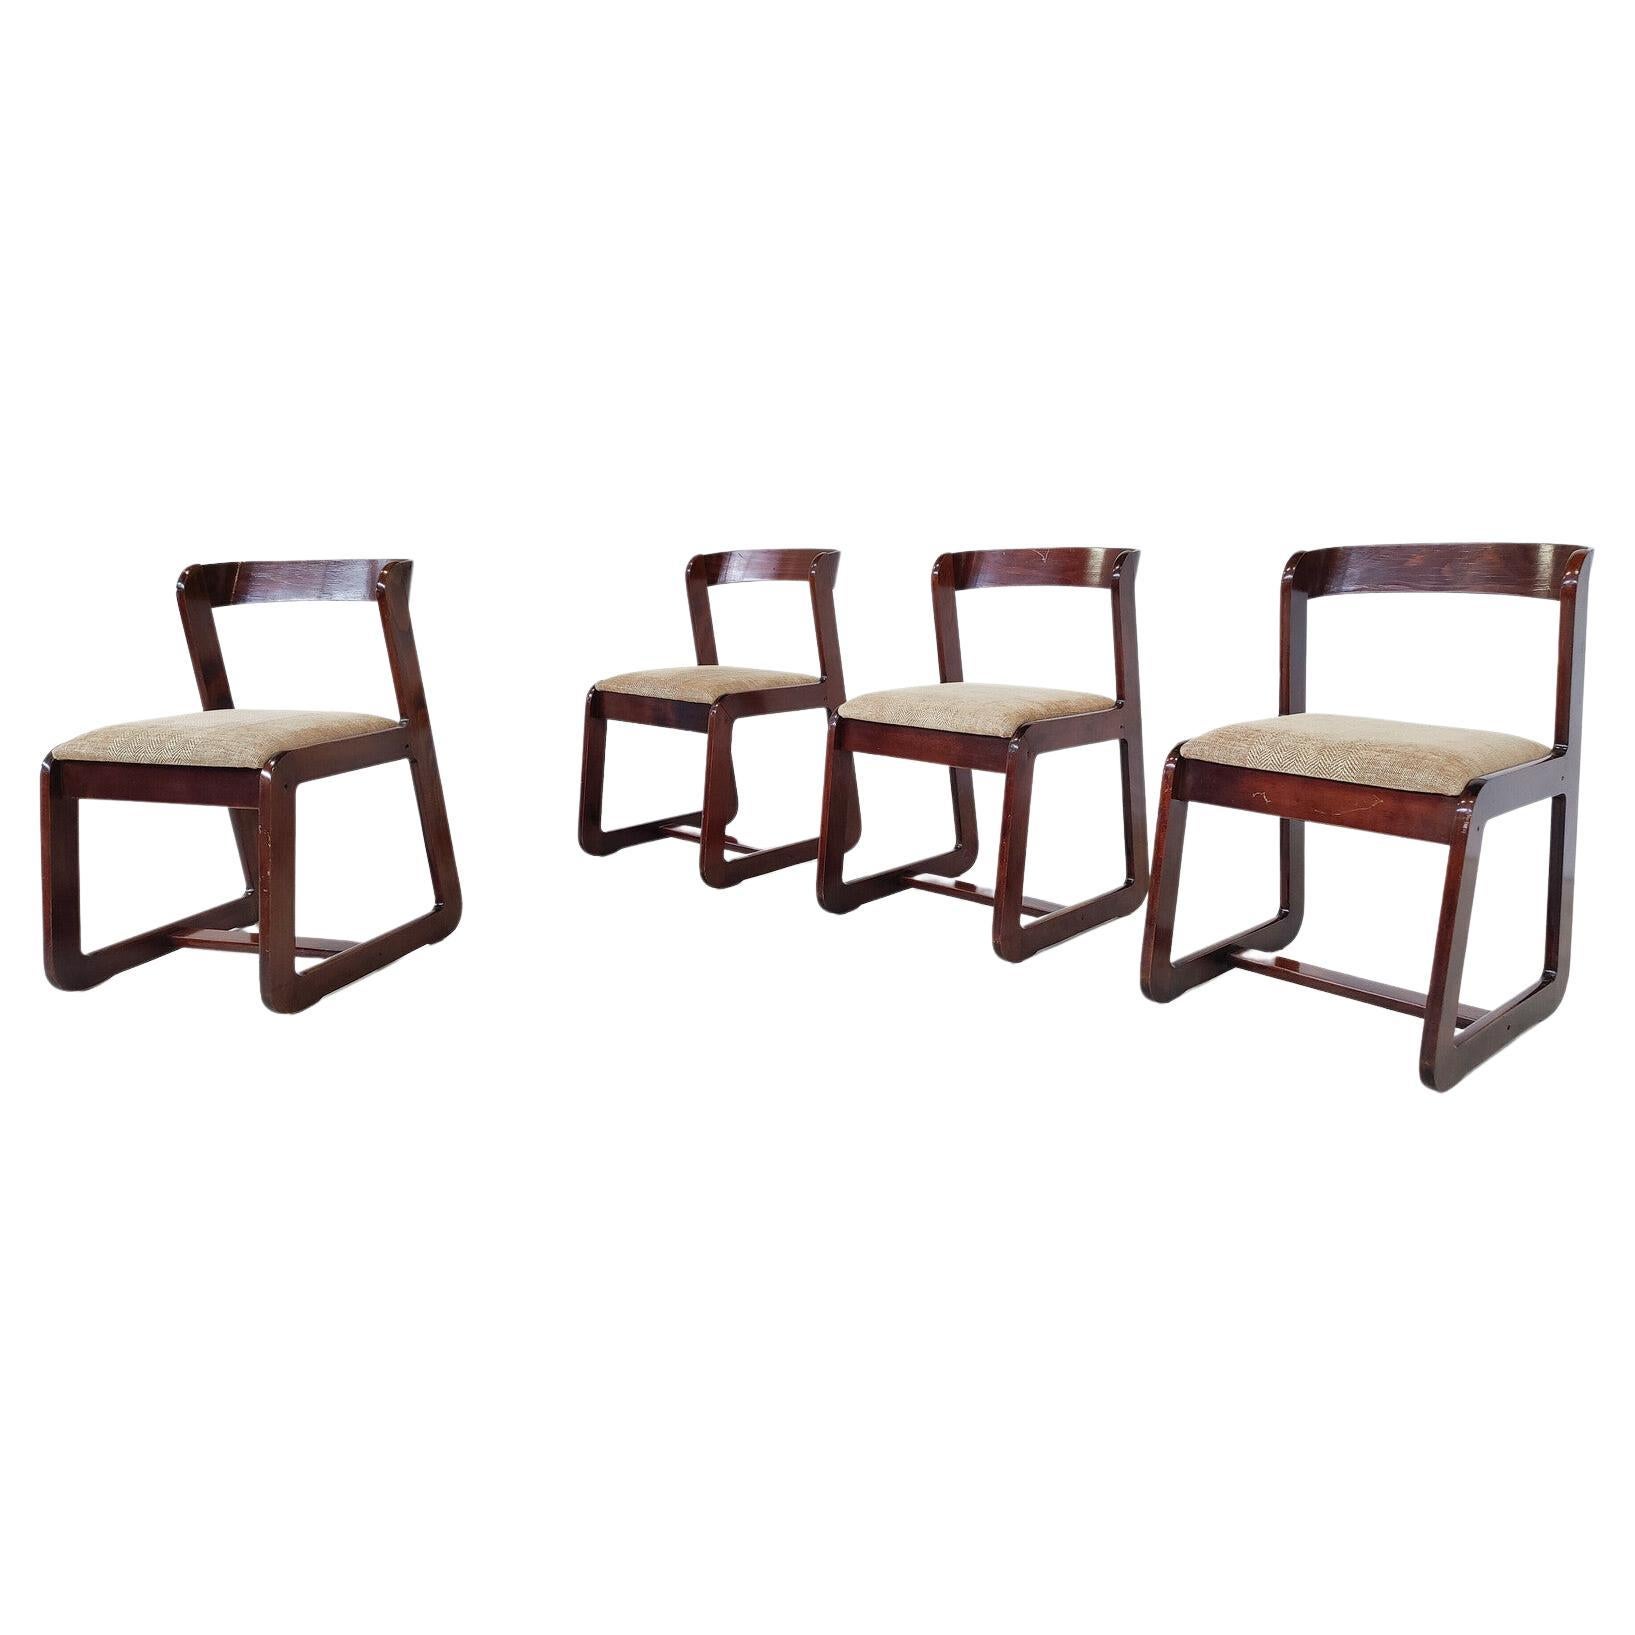 Mid-Century Modern Set of 4 Chairs by Mario Sabot, Italy, 1970s For Sale